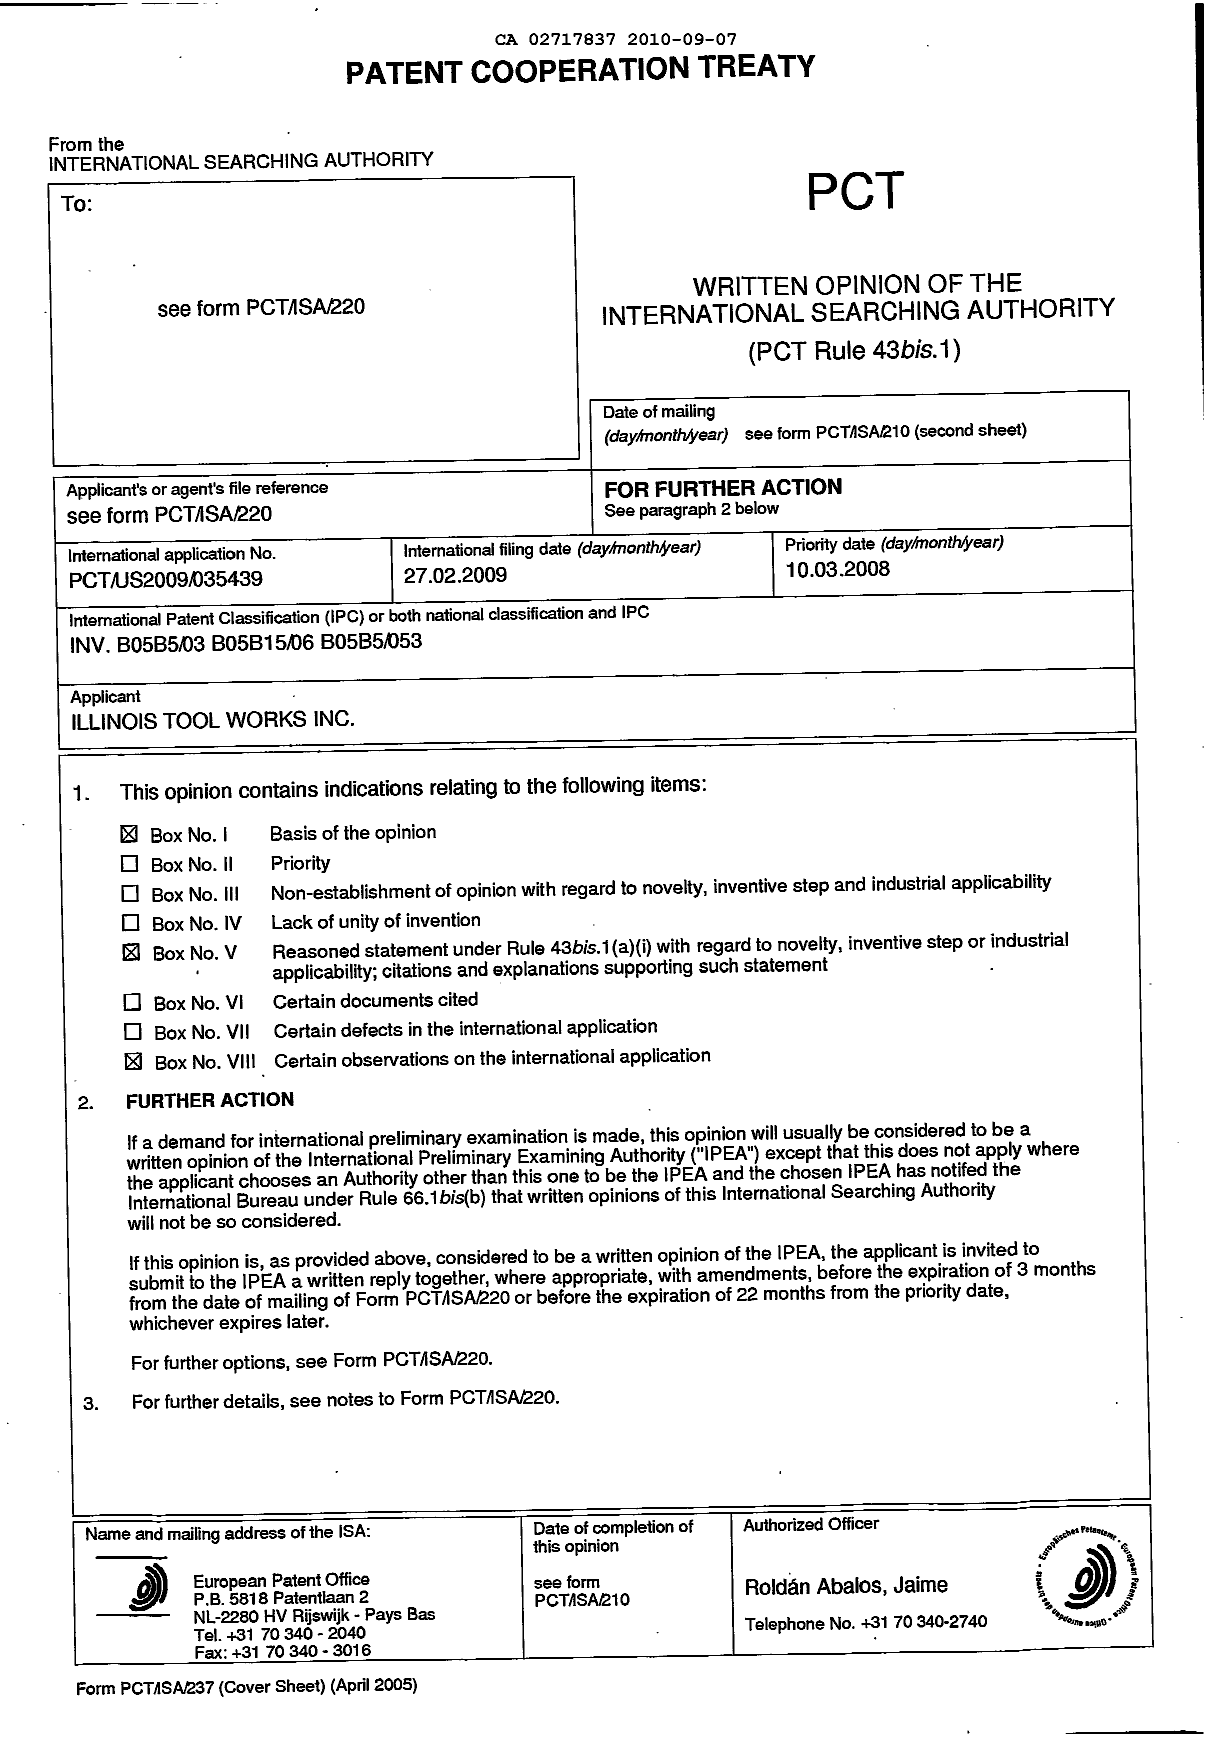 Canadian Patent Document 2717837. PCT 20100907. Image 2 of 8